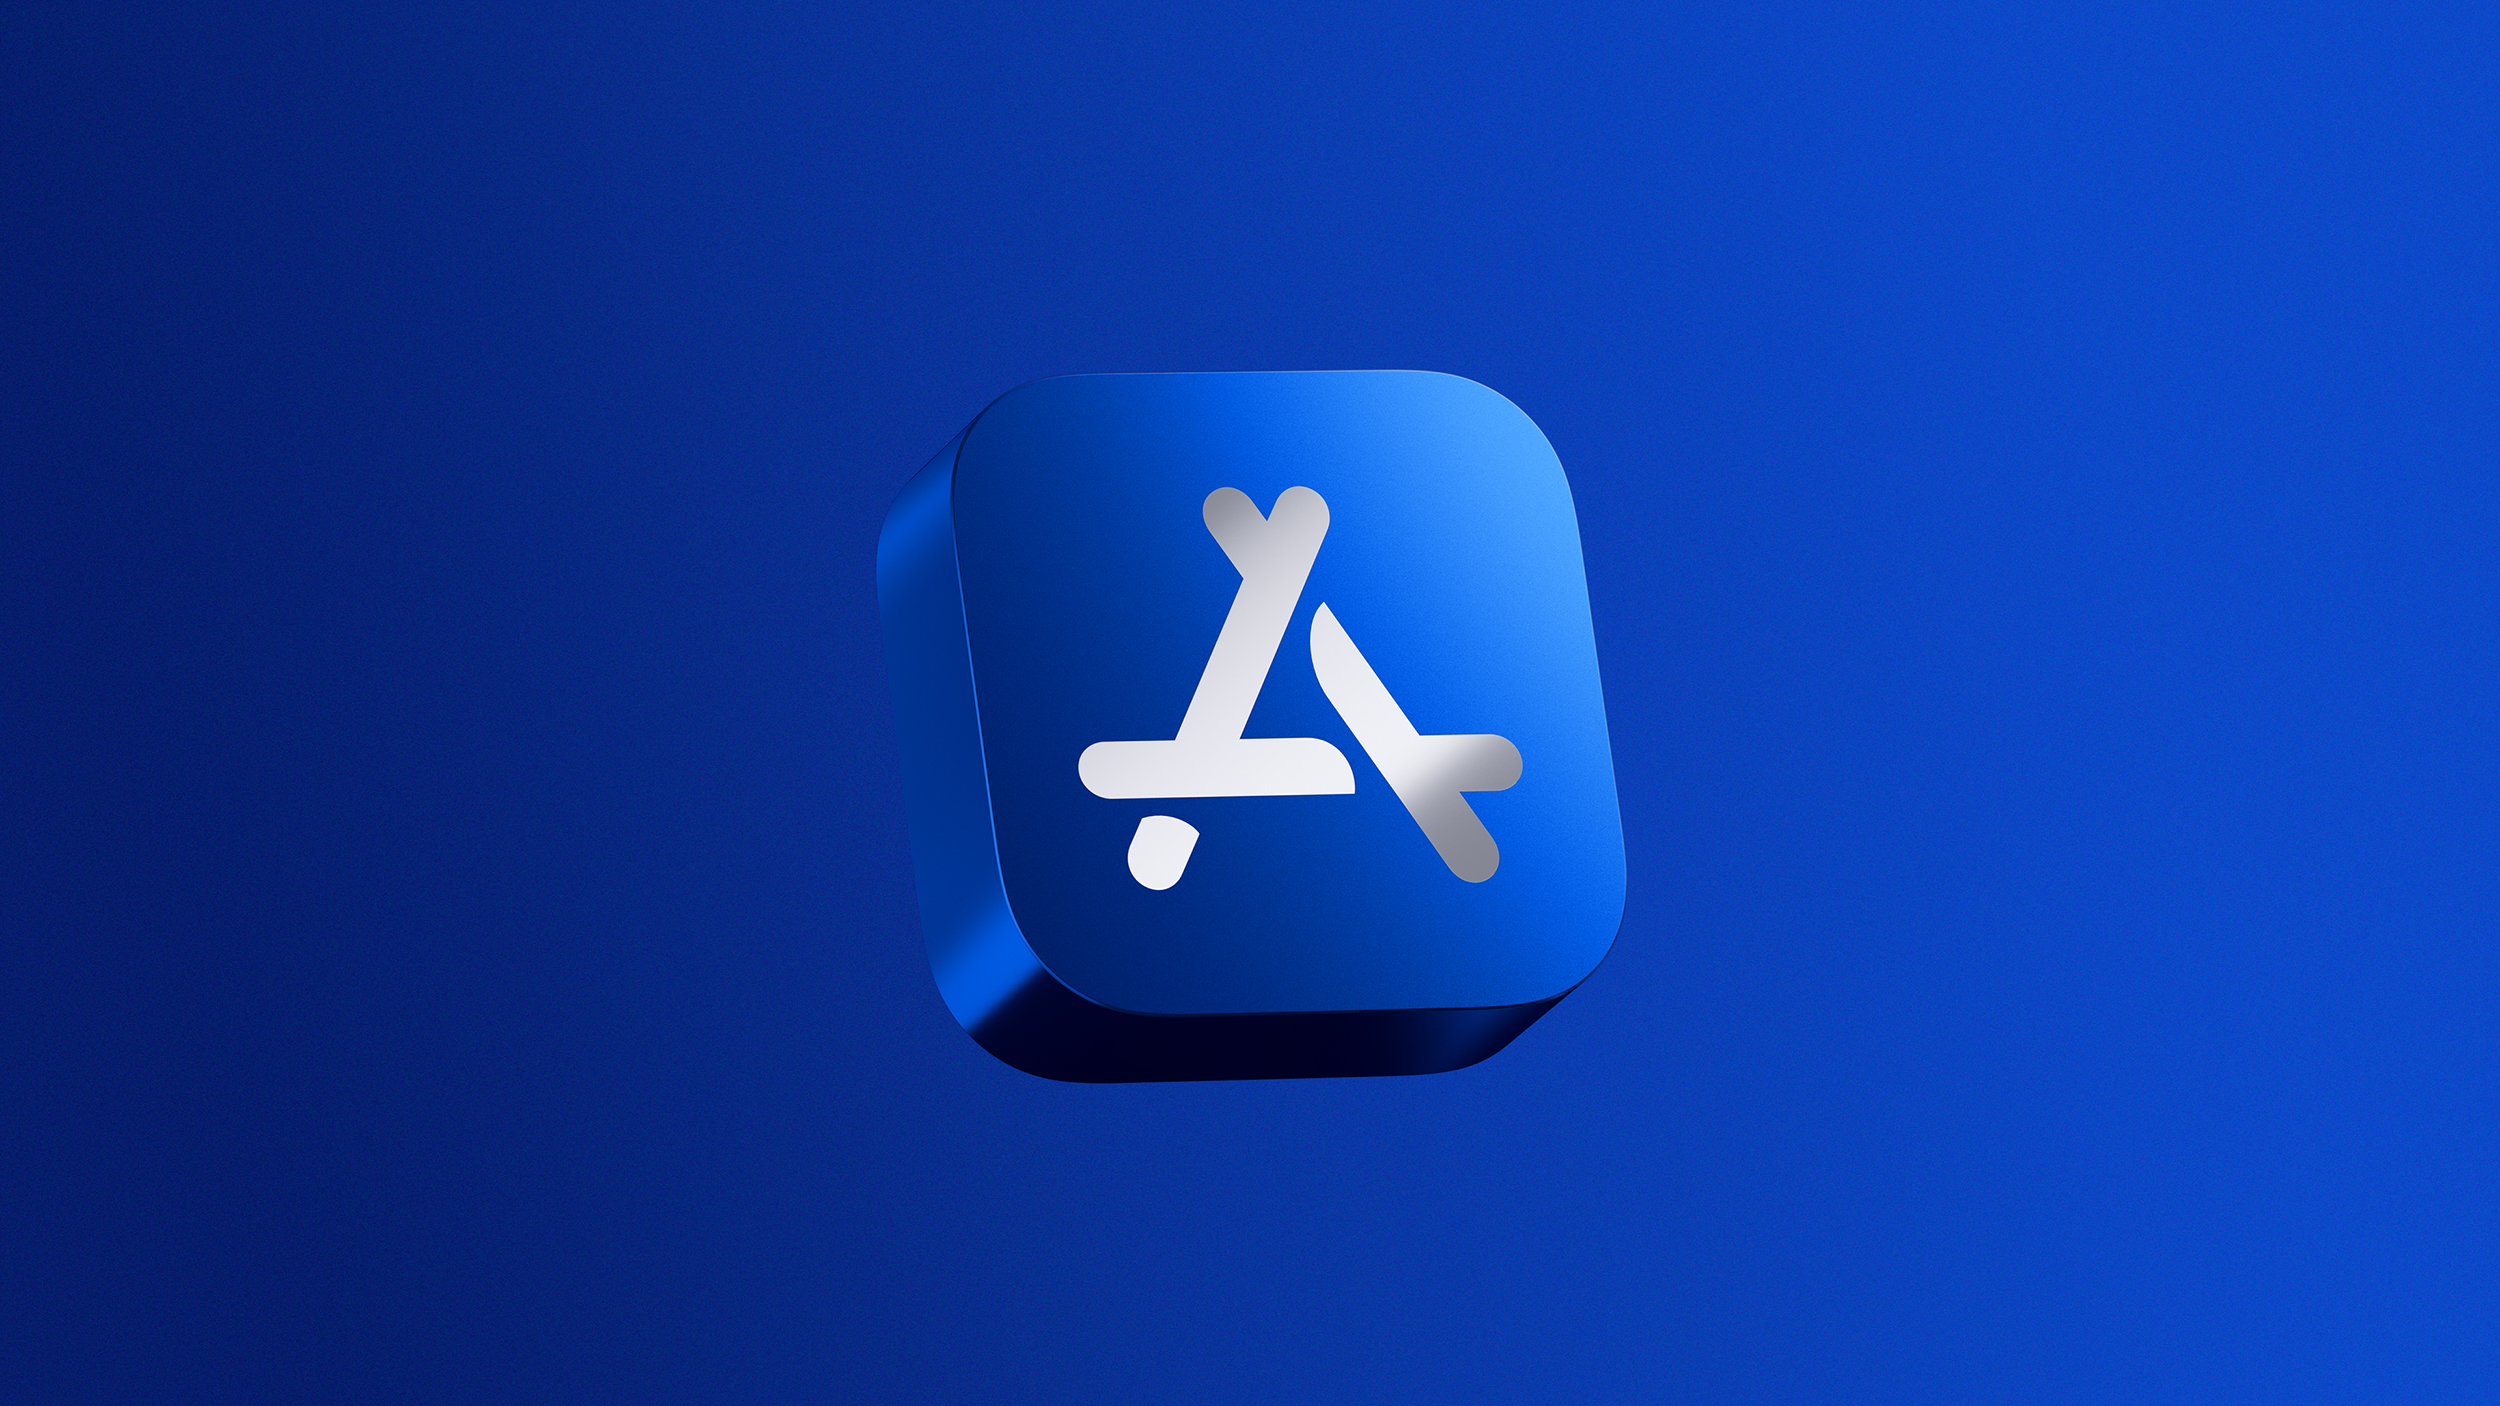 The App Store logo on a blue background